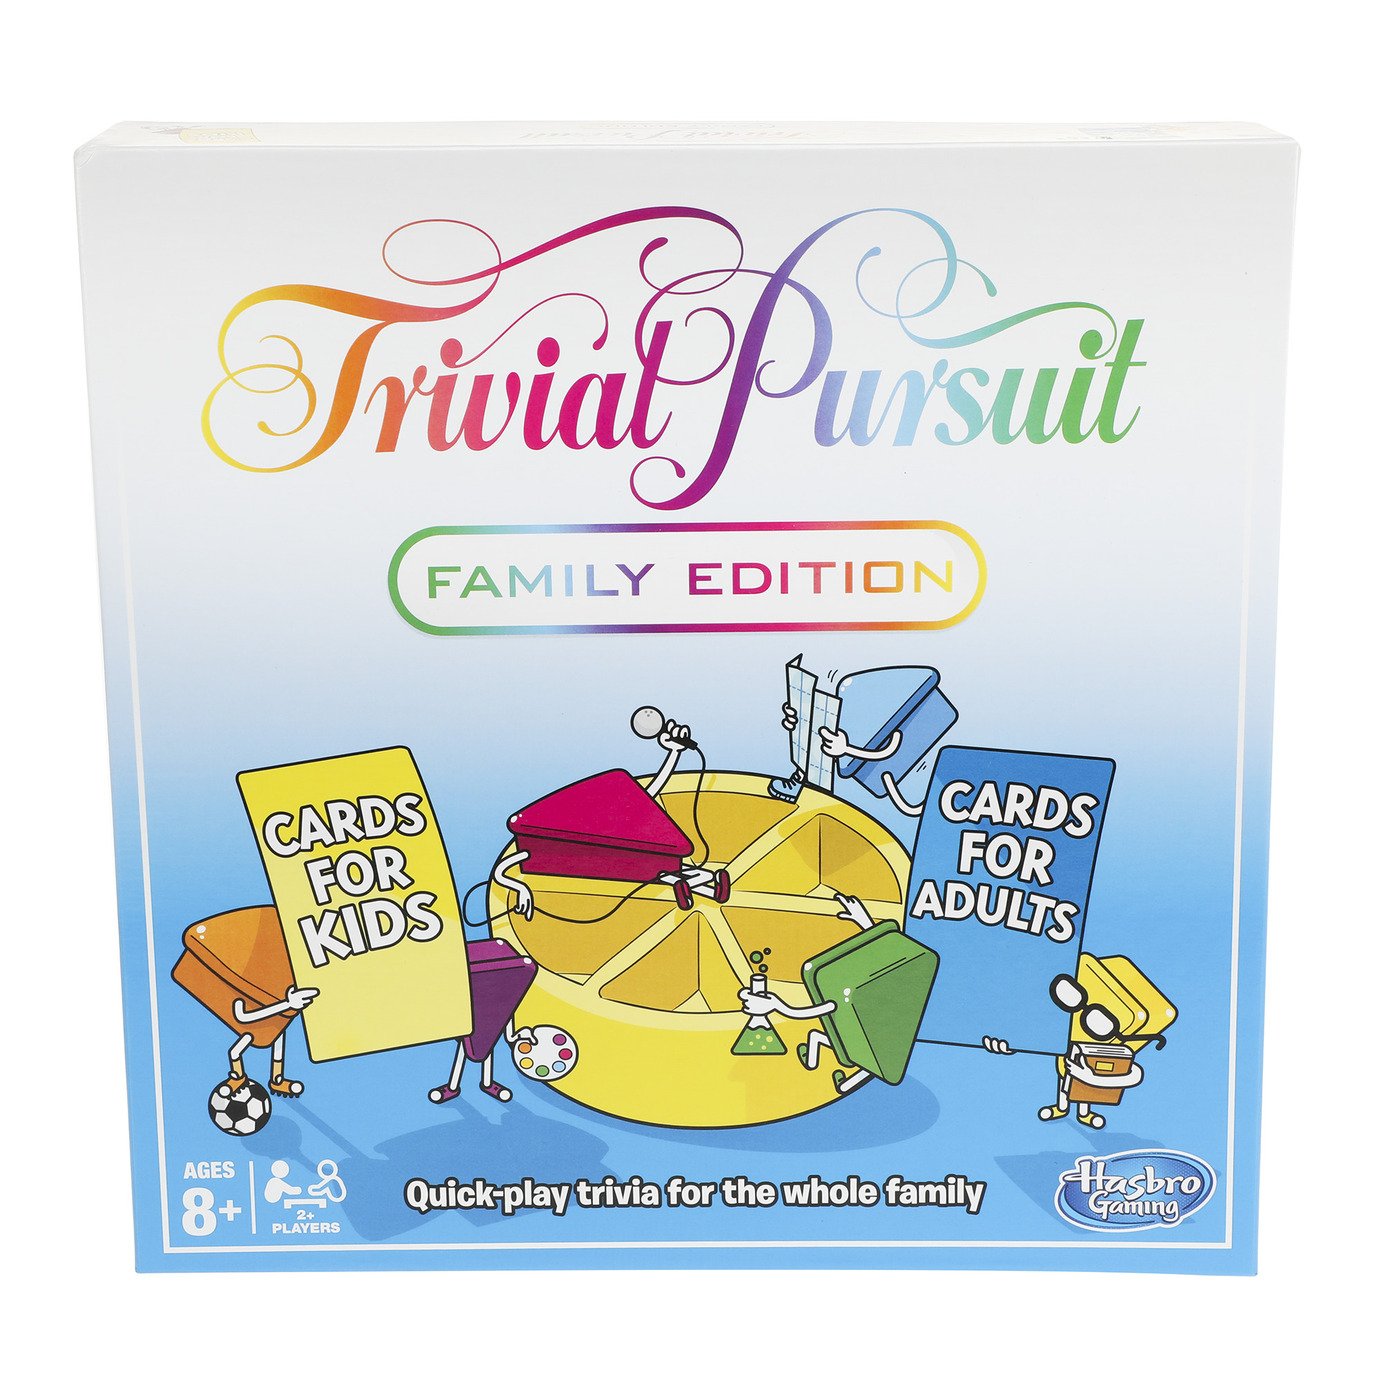 Trivial Pursuit Family Edition Board Game from Hasbro Gaming